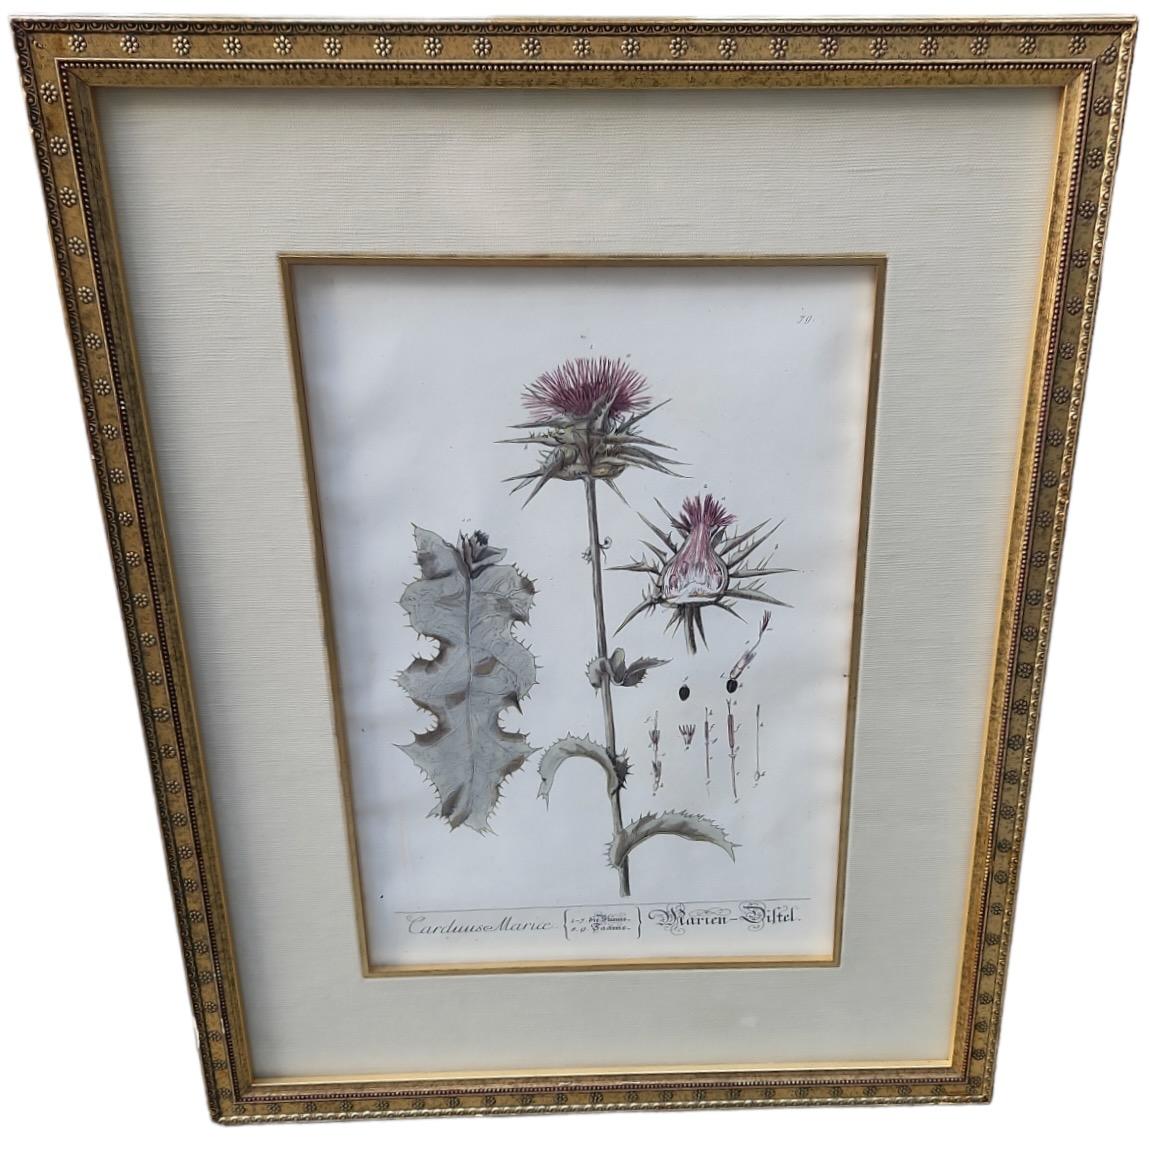 Neoclassical 18th Century Elizabeth Blackwell Hand Tinted Botanicals - 4 Available For Sale